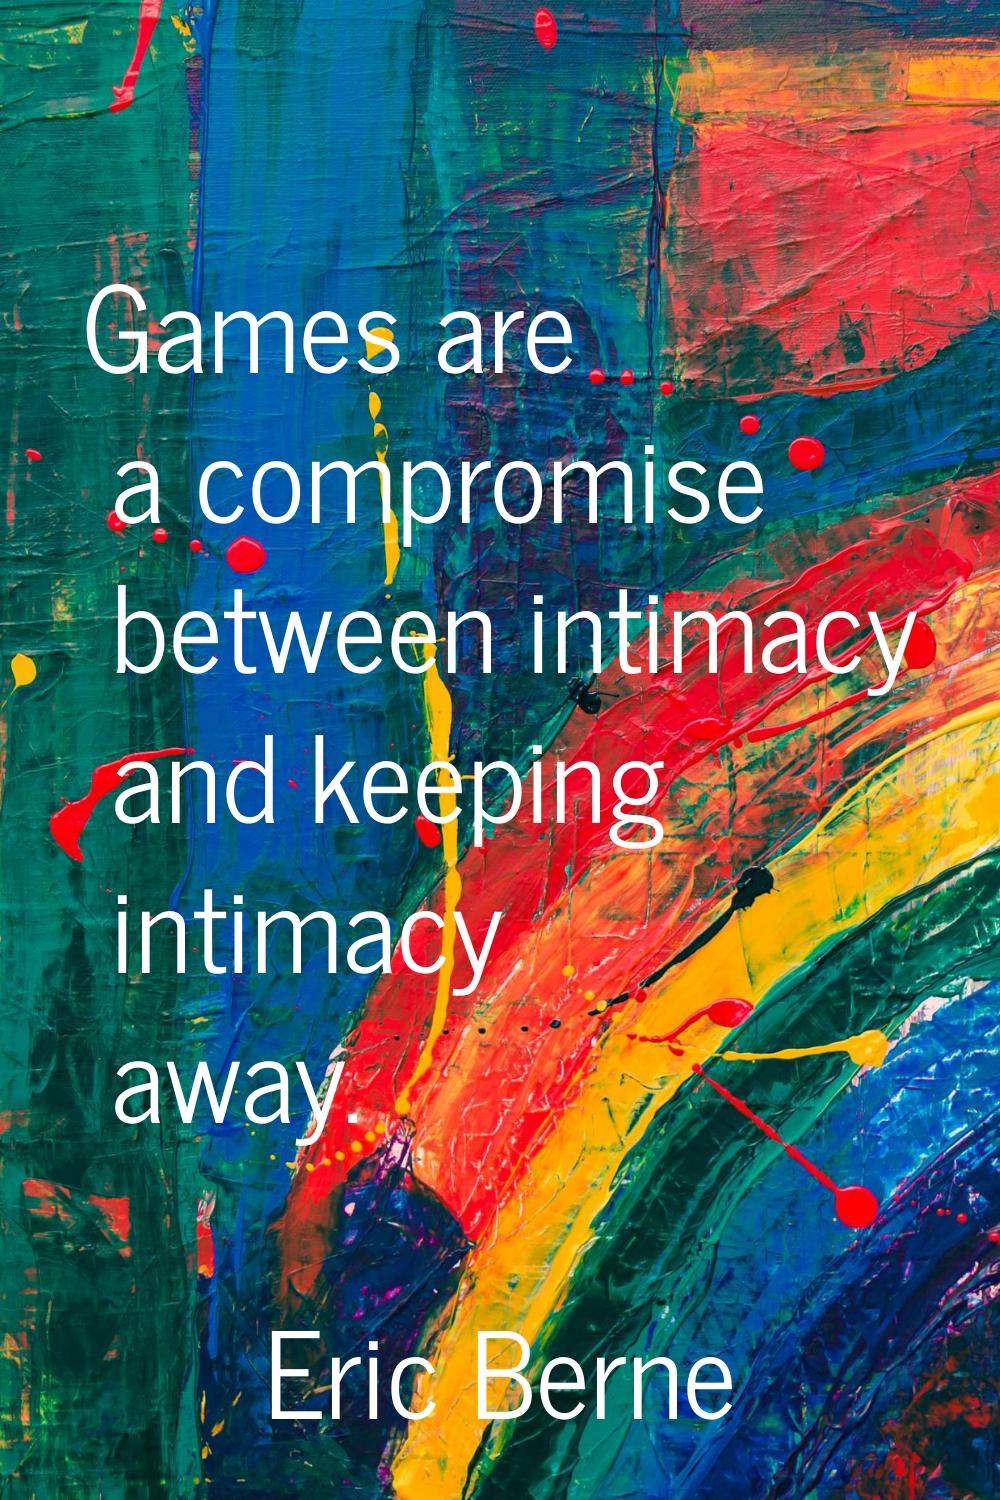 Games are a compromise between intimacy and keeping intimacy away.